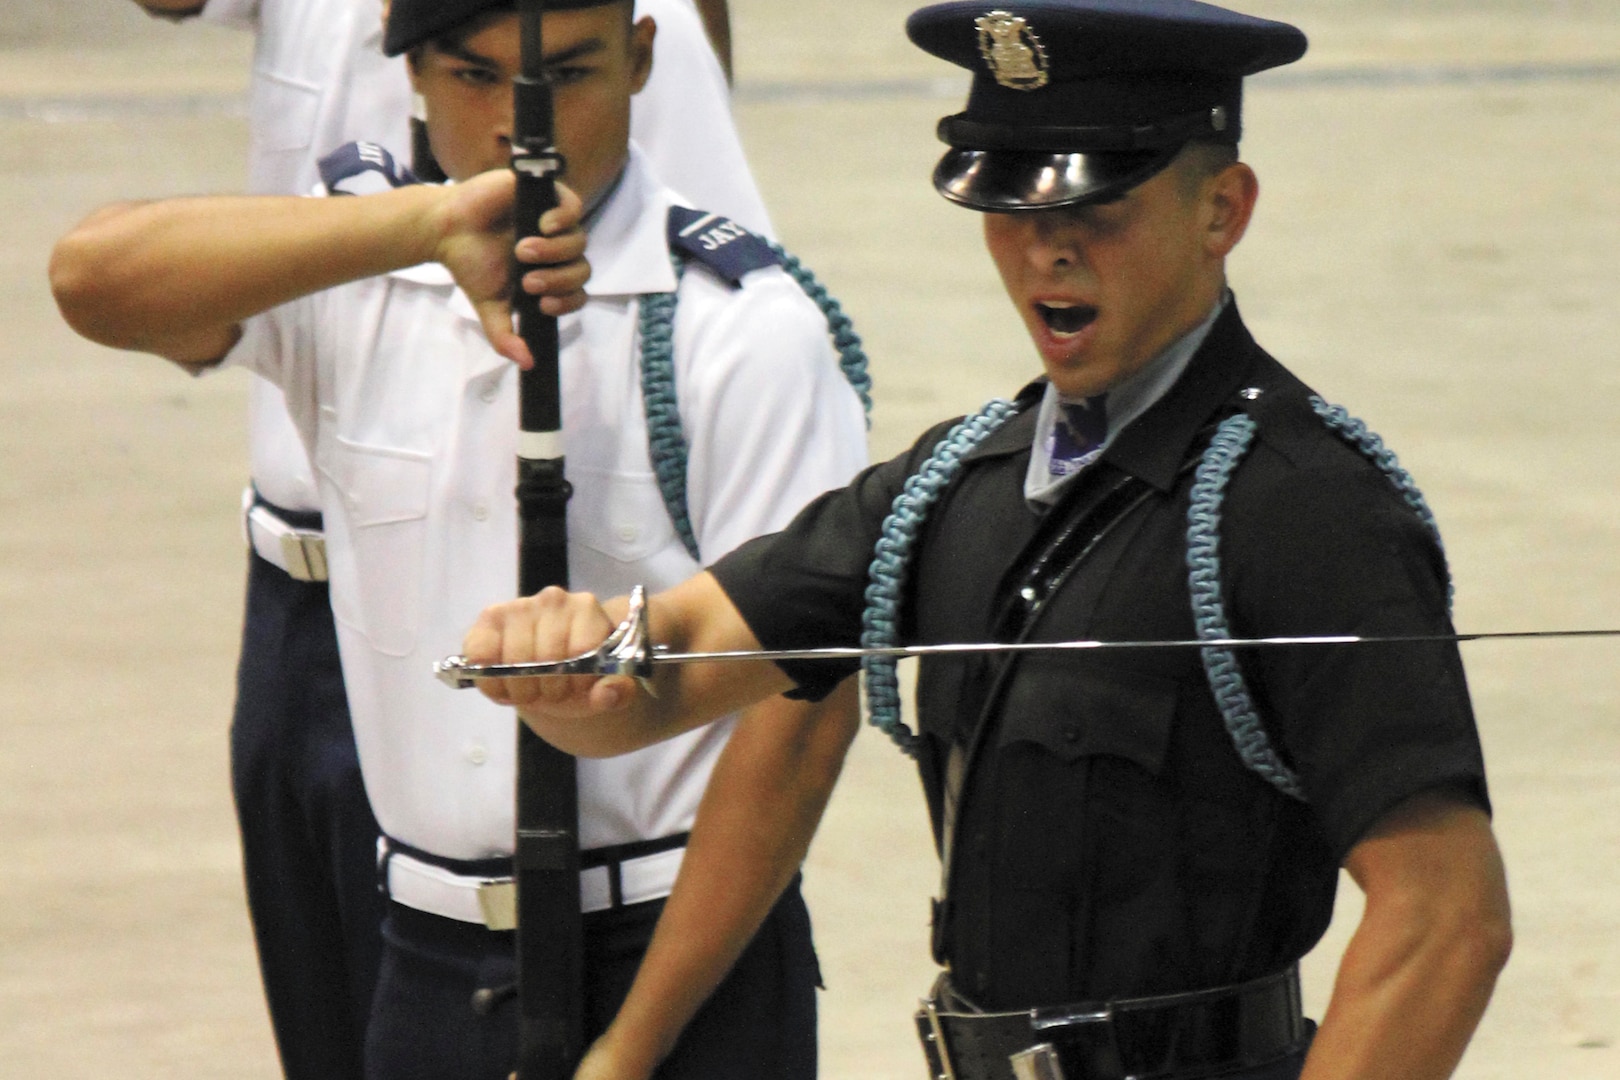 Marcus Zapata, commander of the John Jay High School Silver Eagles Armed Drill Team, gives a command during the U.S. Nationals High School Armed Drill Team competition. The Silver Eagles competed against more than 20 Junior Reserve Officer Training Corps drill teams from all service branches in one of the nation’s largest collections of drill and ceremony talent, taking home the title of national champions. (Courtesy photo)